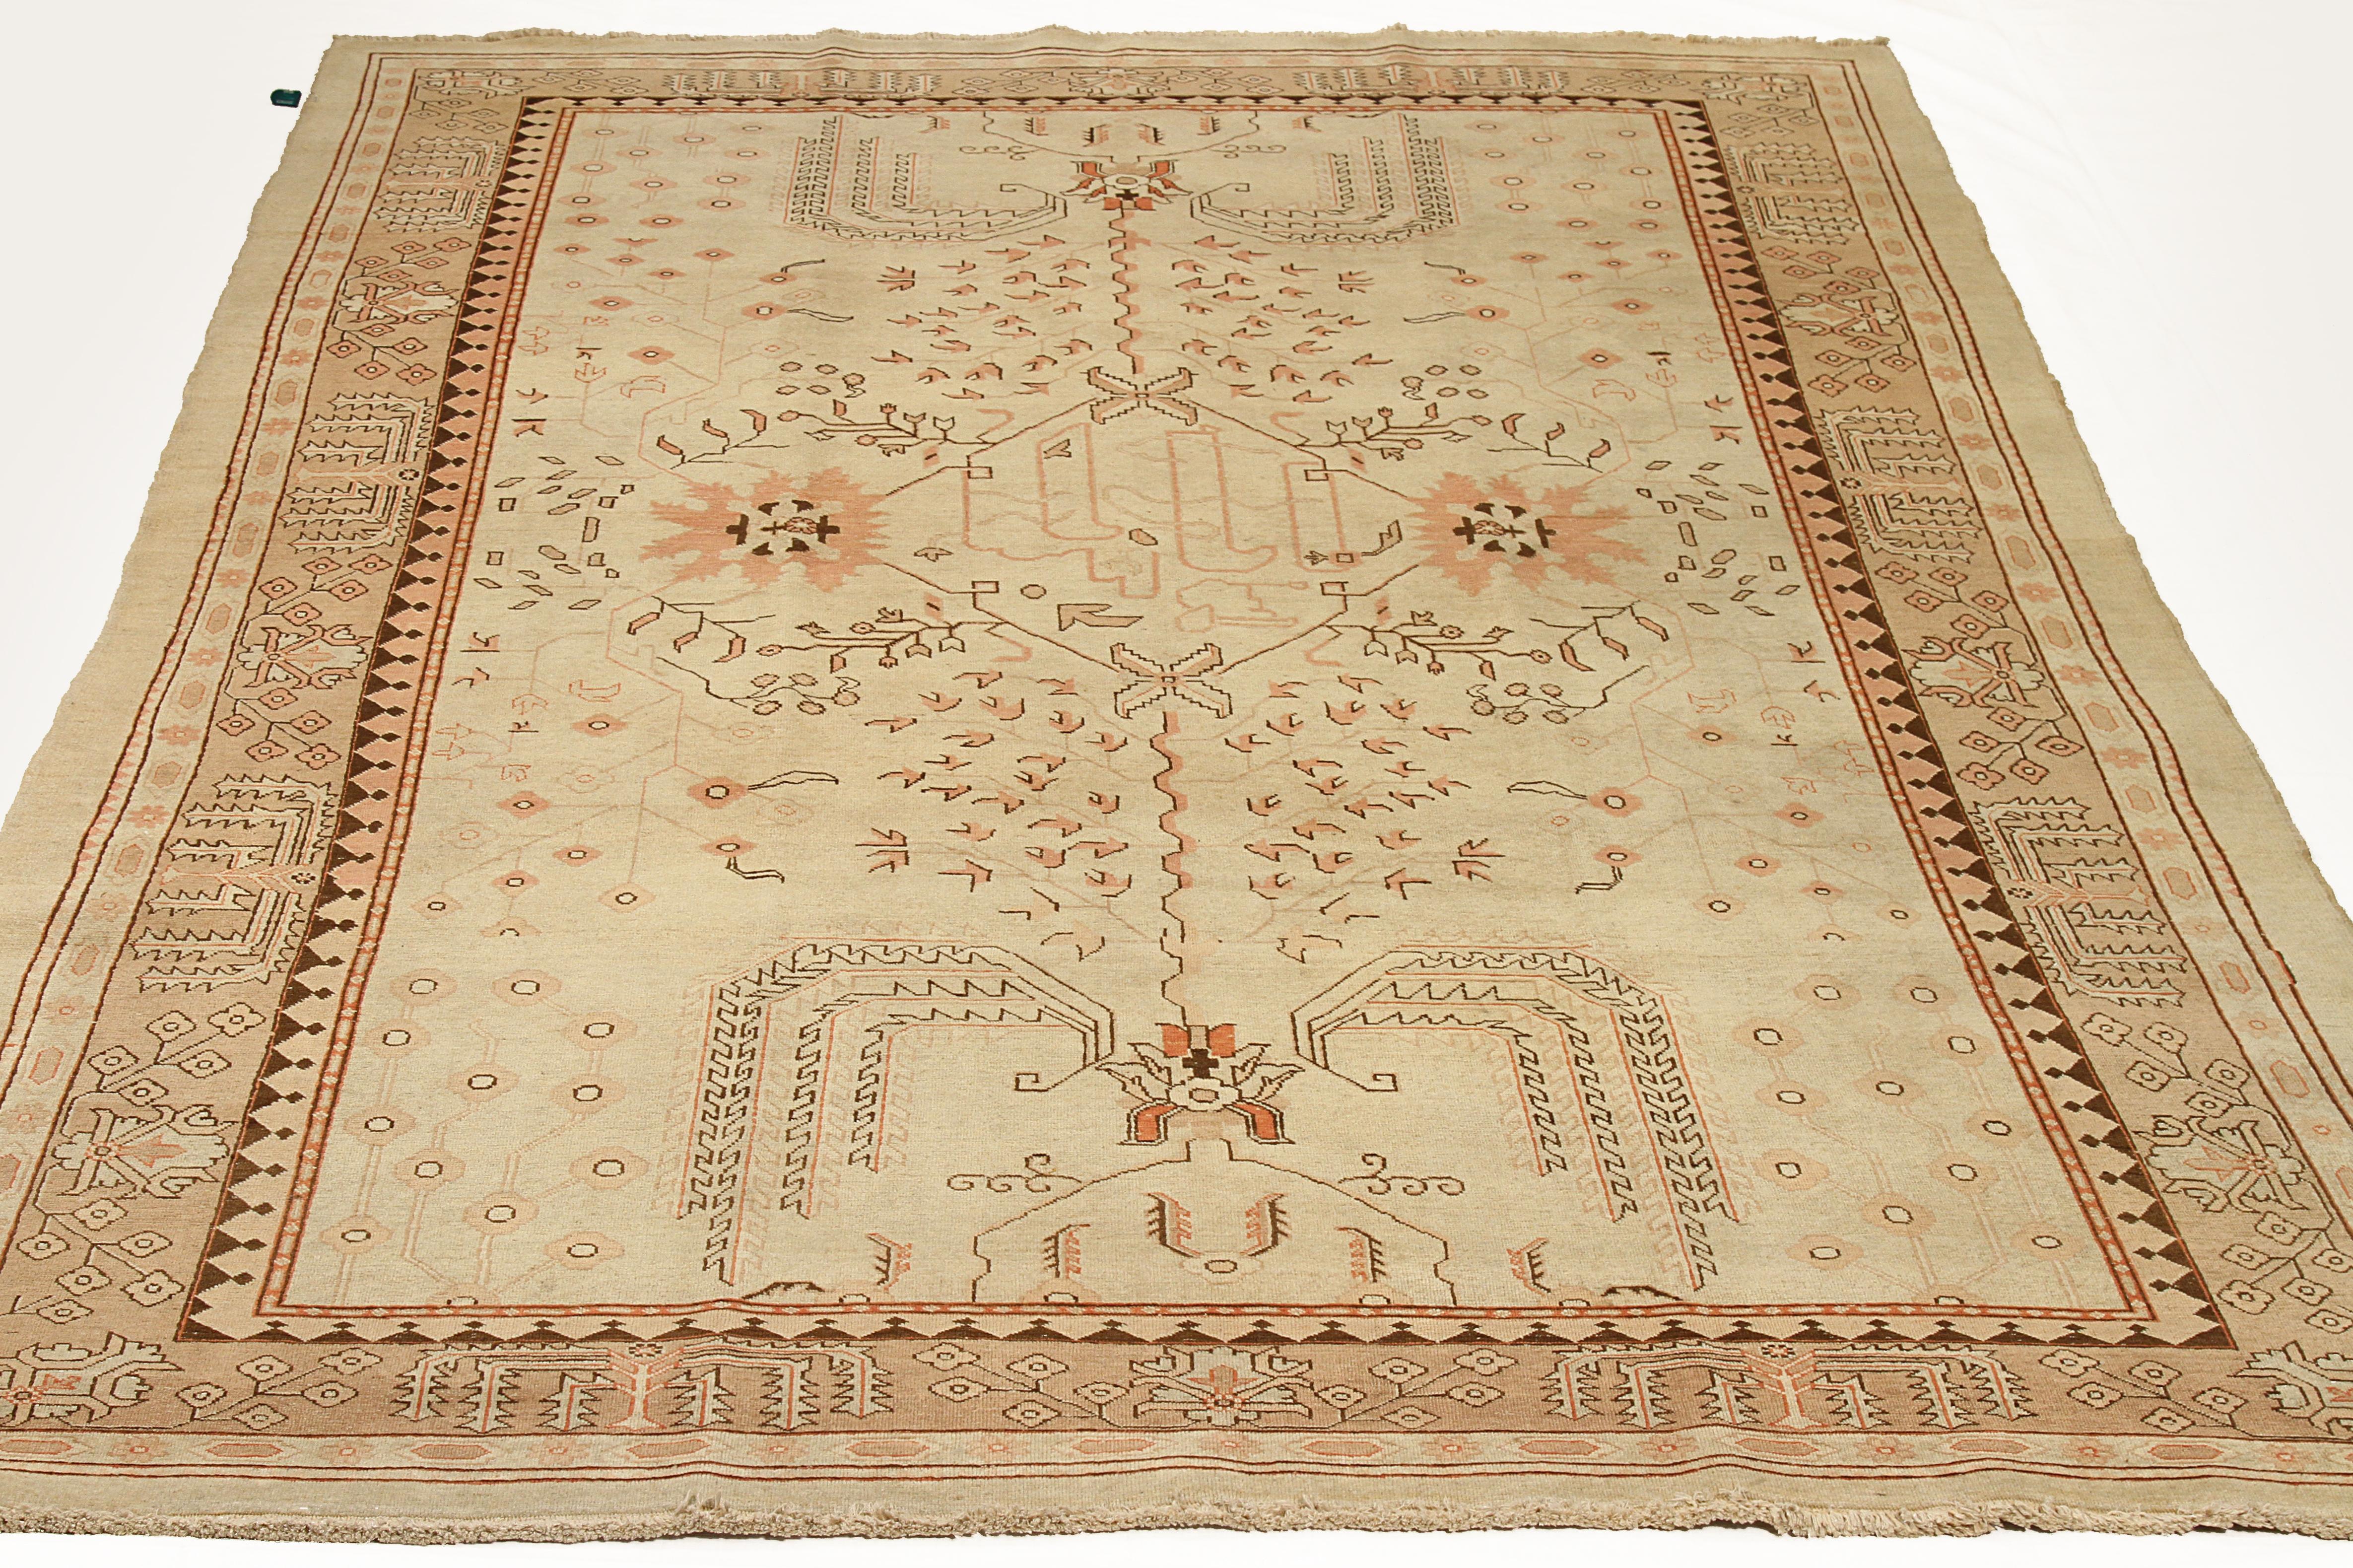 Mid-20th century hand knotted Persian area rug made from fine wool and all-natural vegetable dyes that are safe for people and pets. This beautiful piece features botanical and floral patterns set in an ivory field which is a hallmark of a Haji